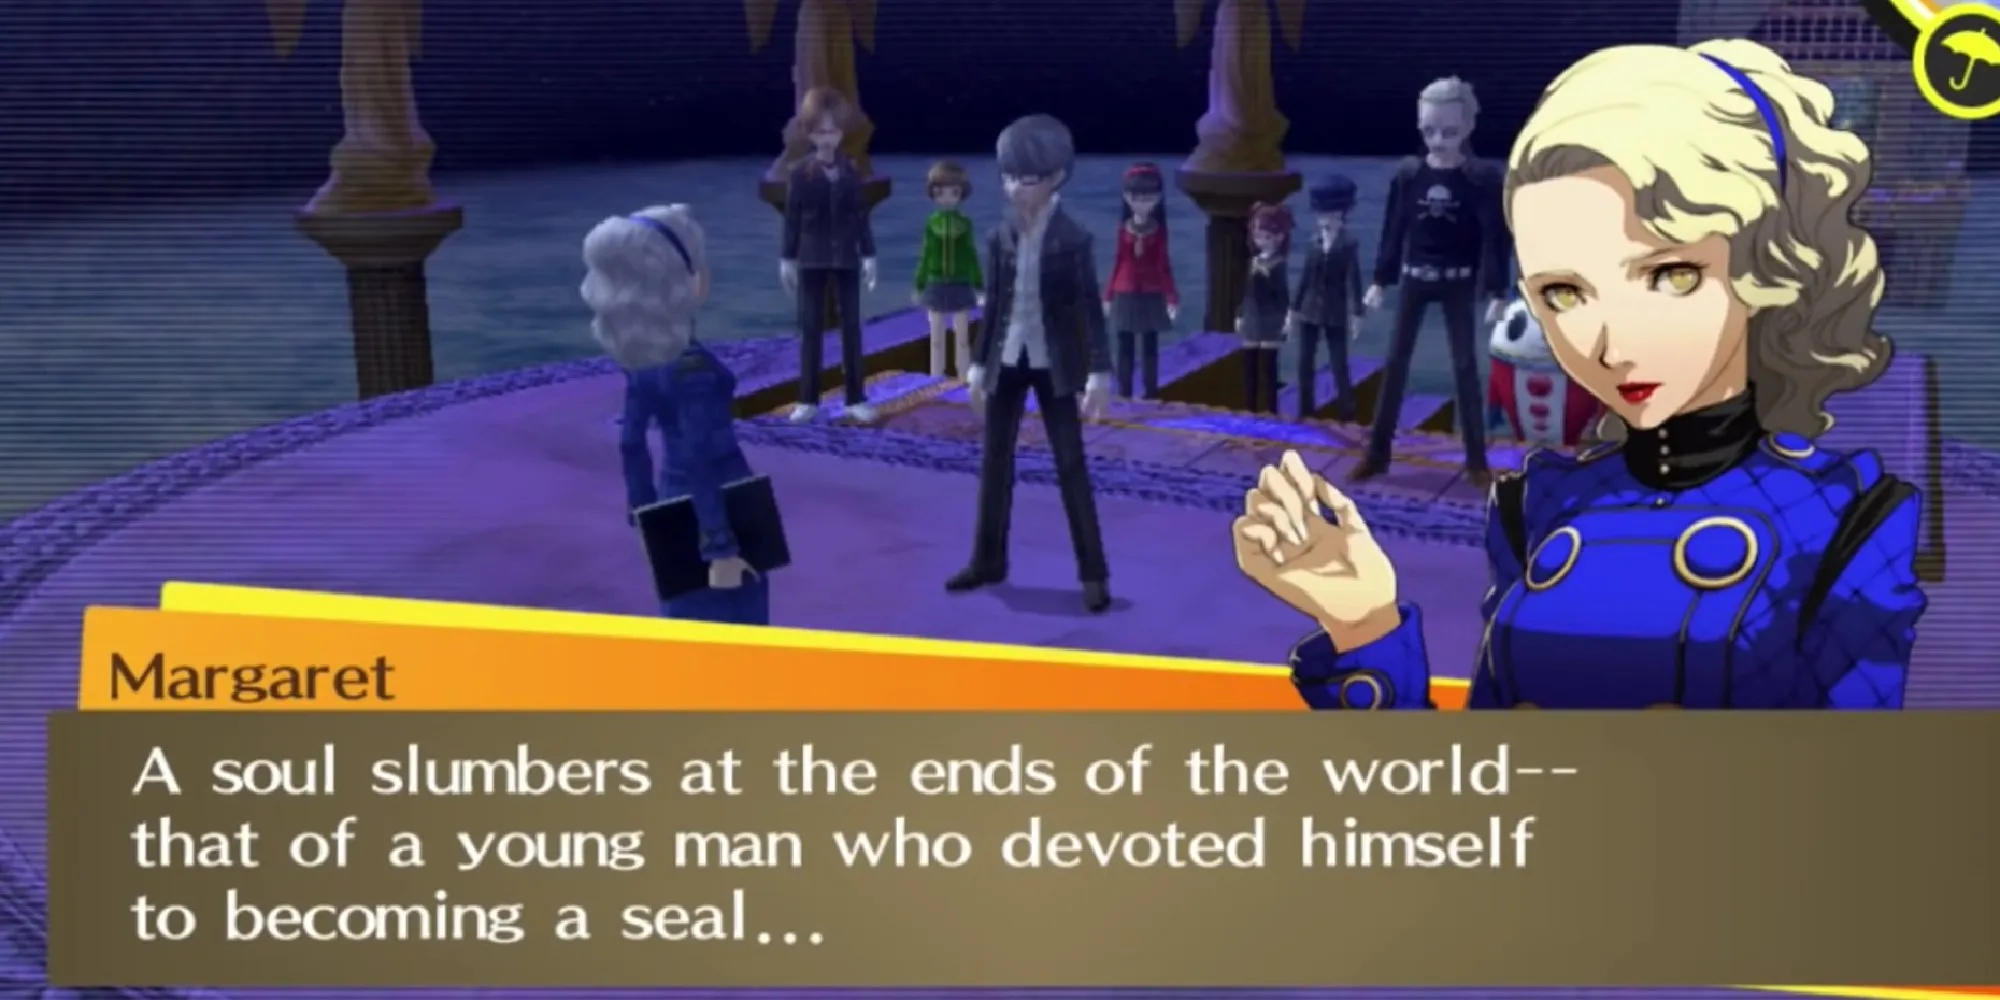 Persona 4 protagonist talking to Margaret after her boss fight, with the rest of the cast behind them